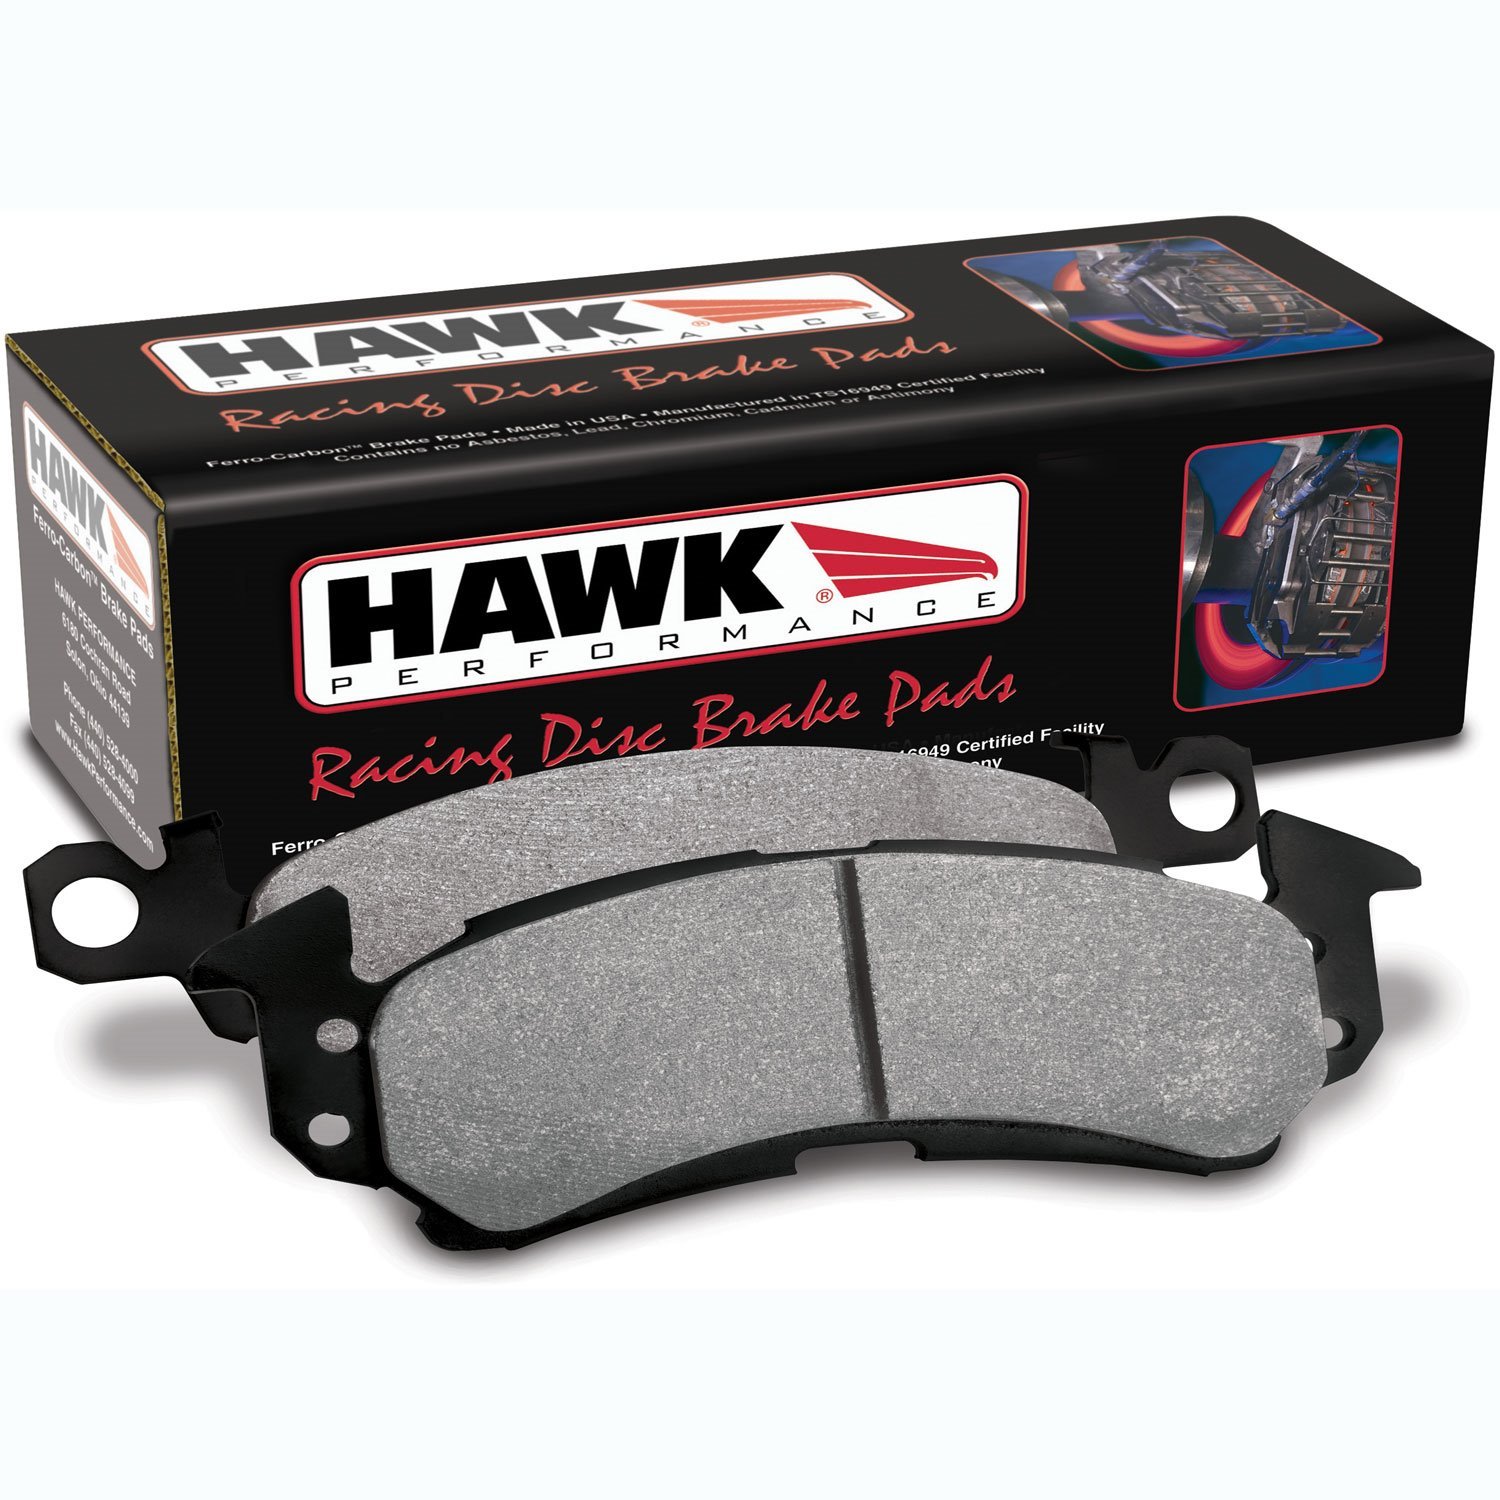 Disc Brake Pad DR-97 w/0.490 Thickness